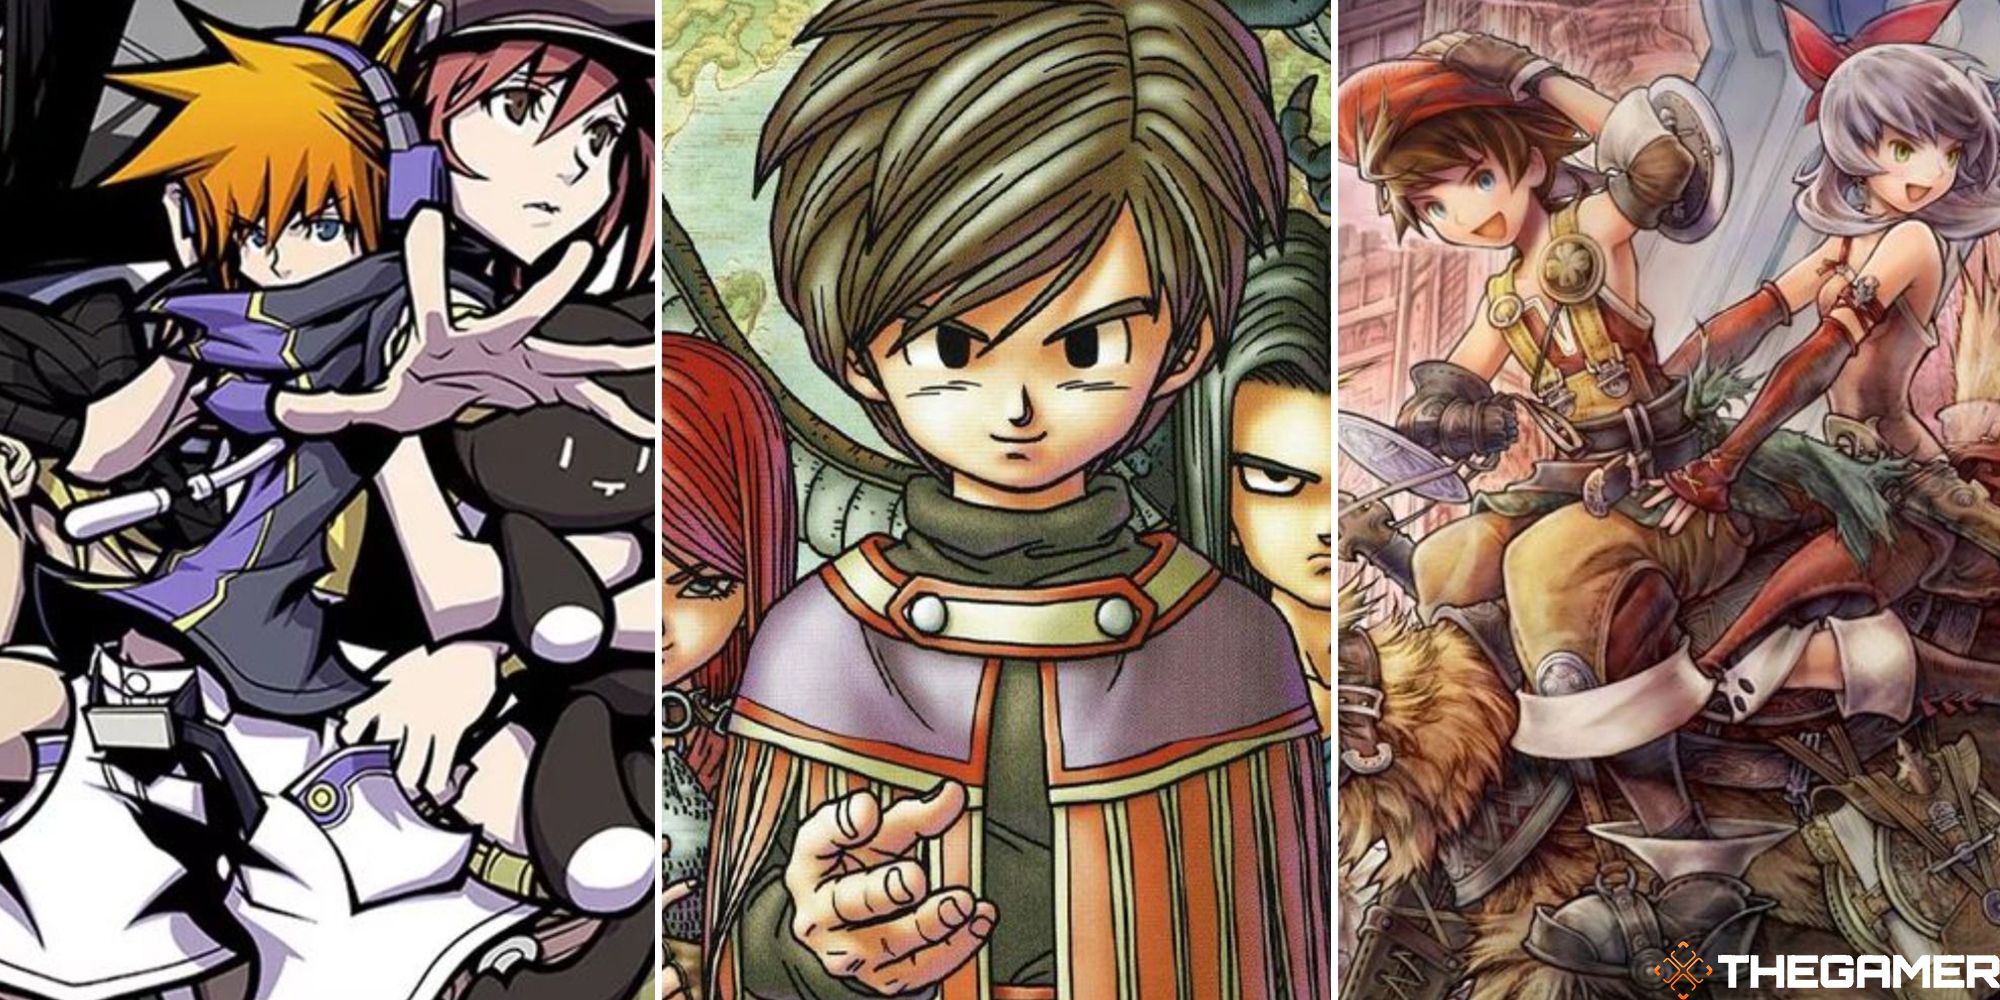 the world ends with you, dragon quest 9, and rune factory 3 split image